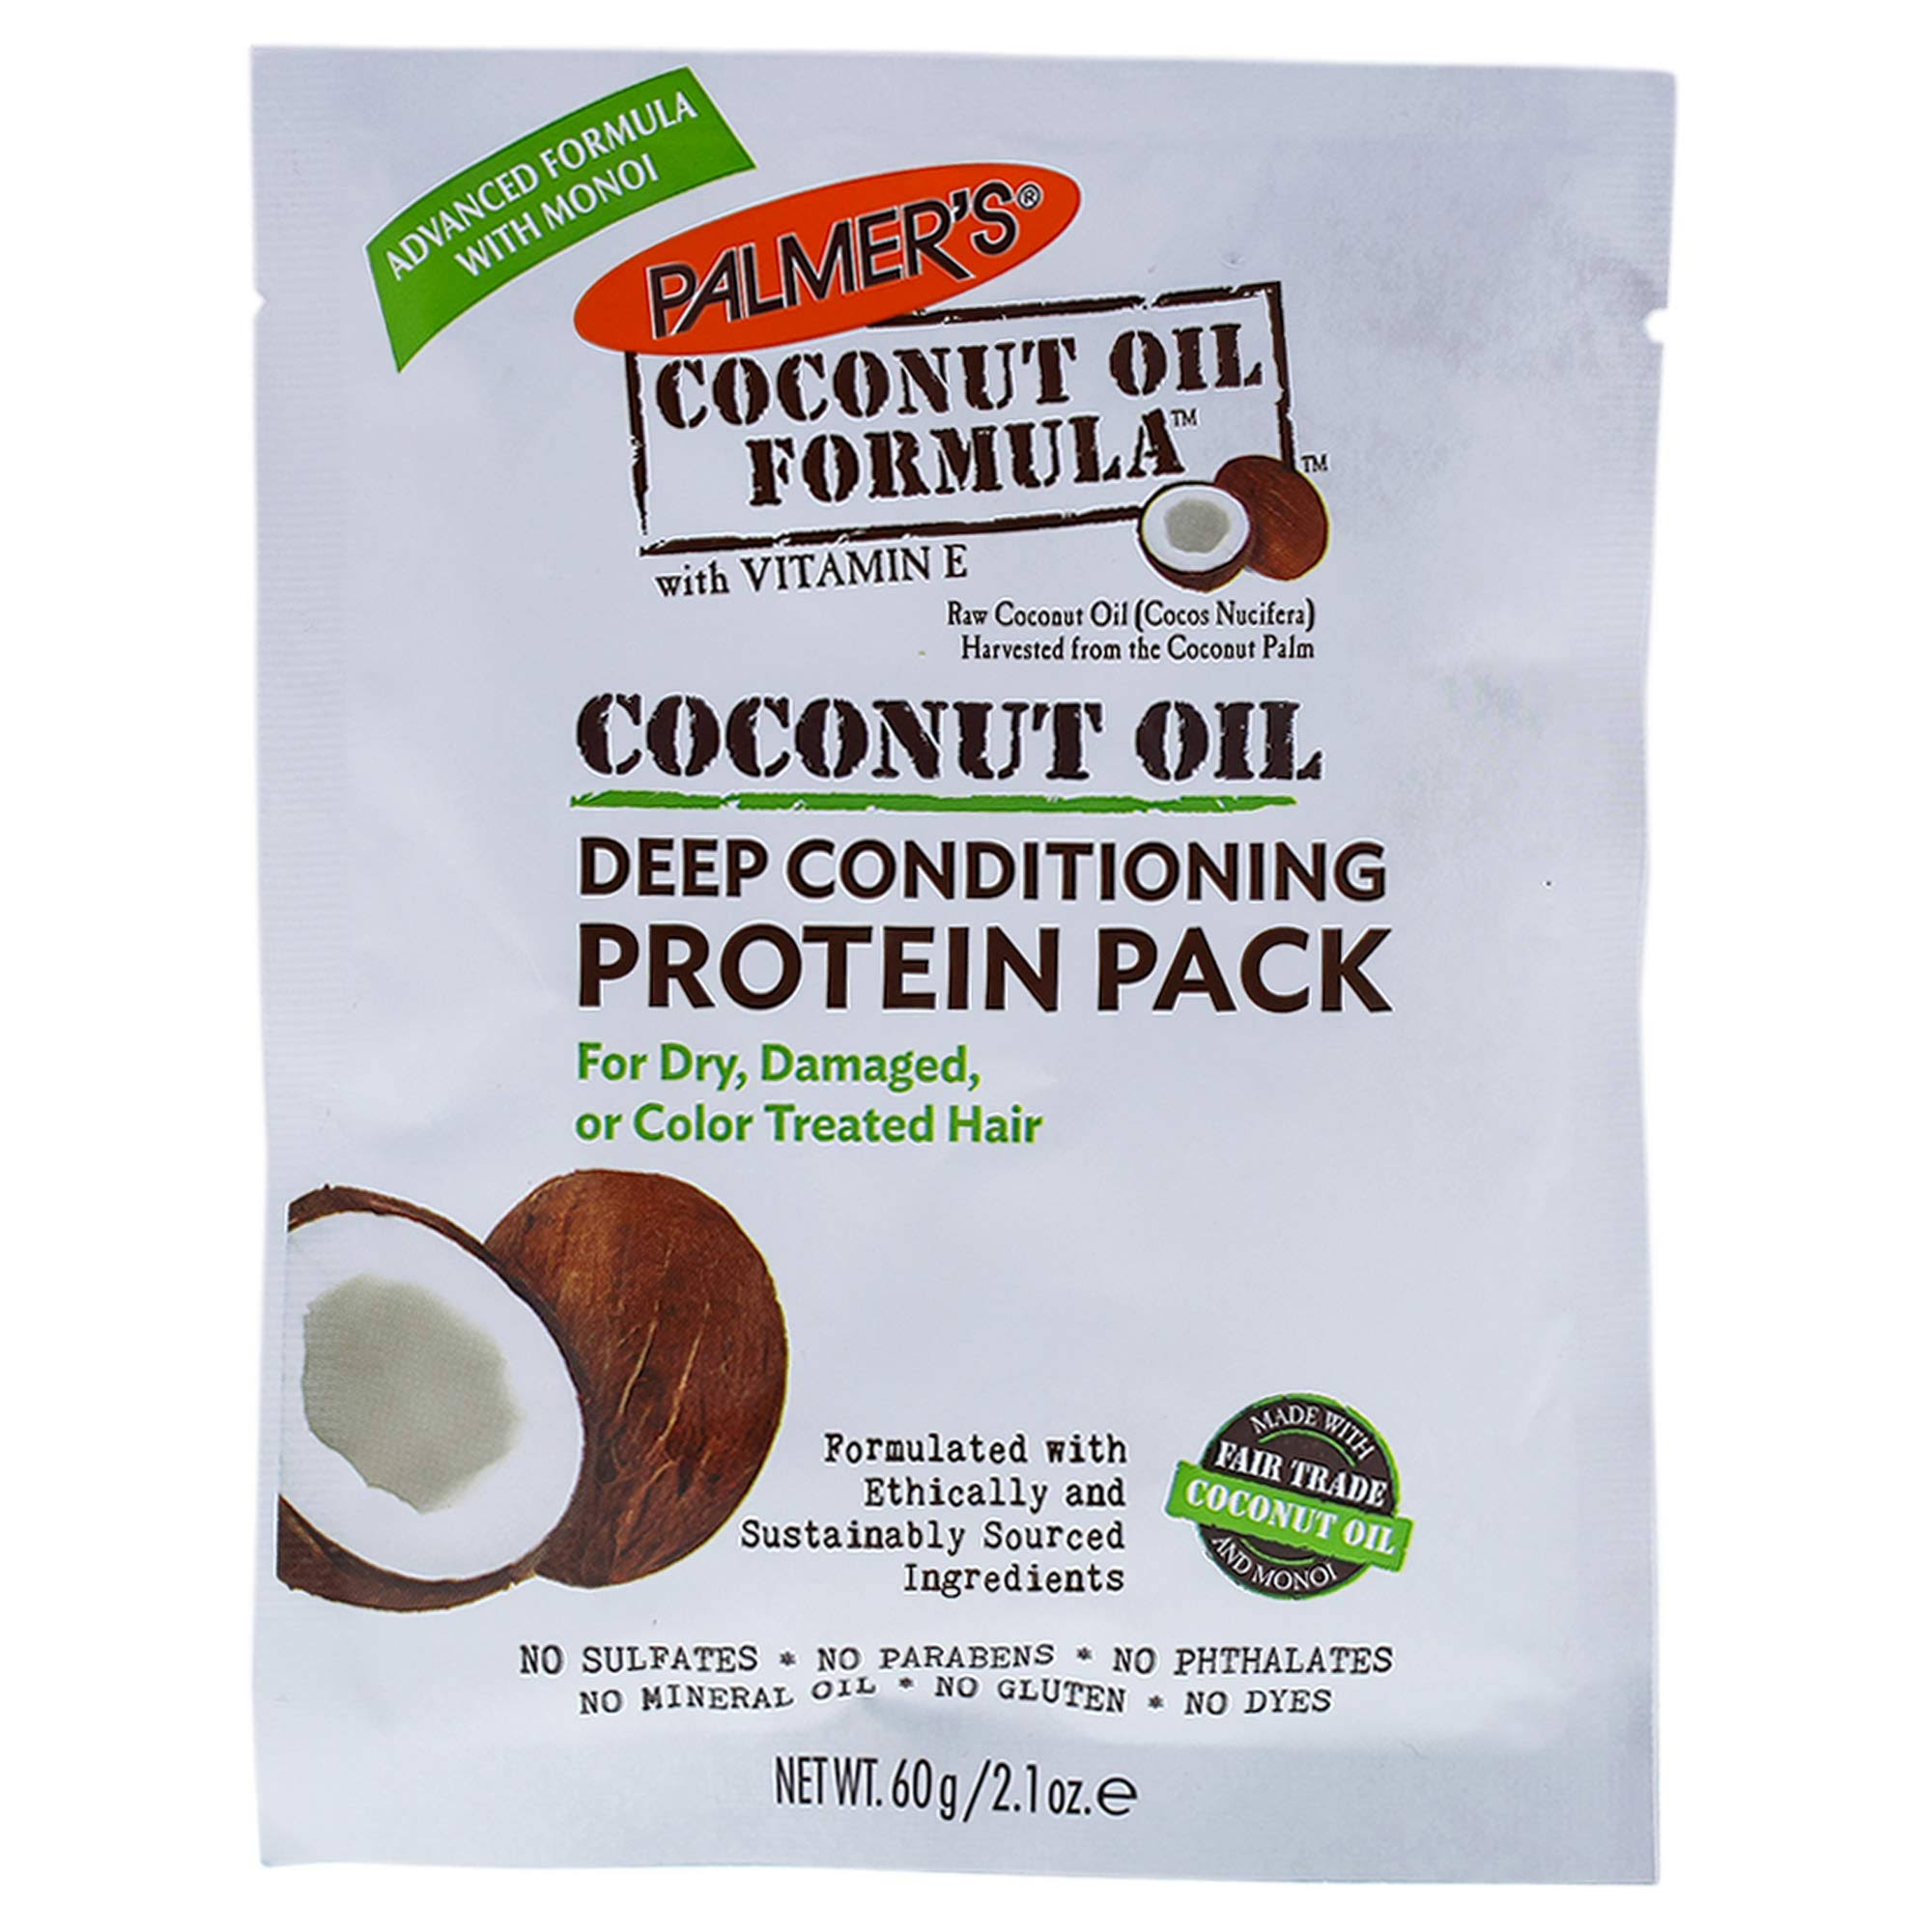 Palmer's Coconut Oil Formula Deep Conditioning Protein Pack - 2.10 oz packet